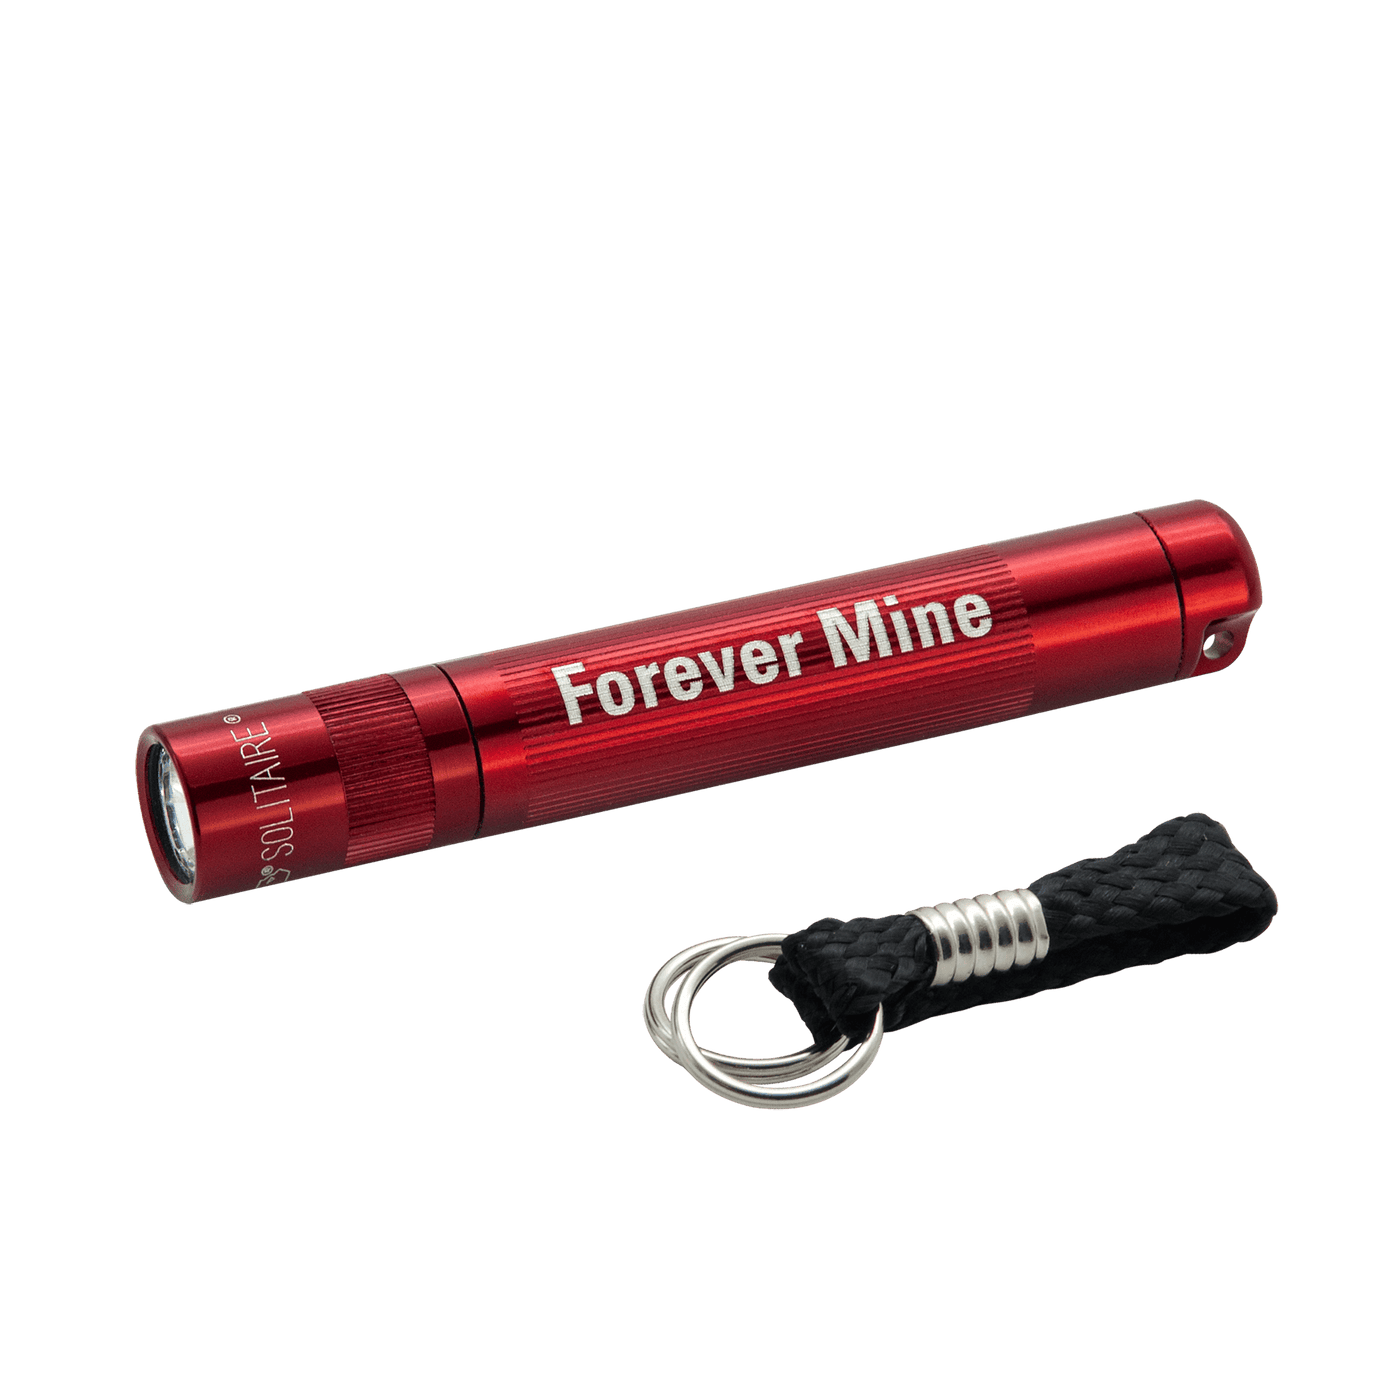 Maglite Solitaire LED - Forever Mine - Key Chain Flashlight Red